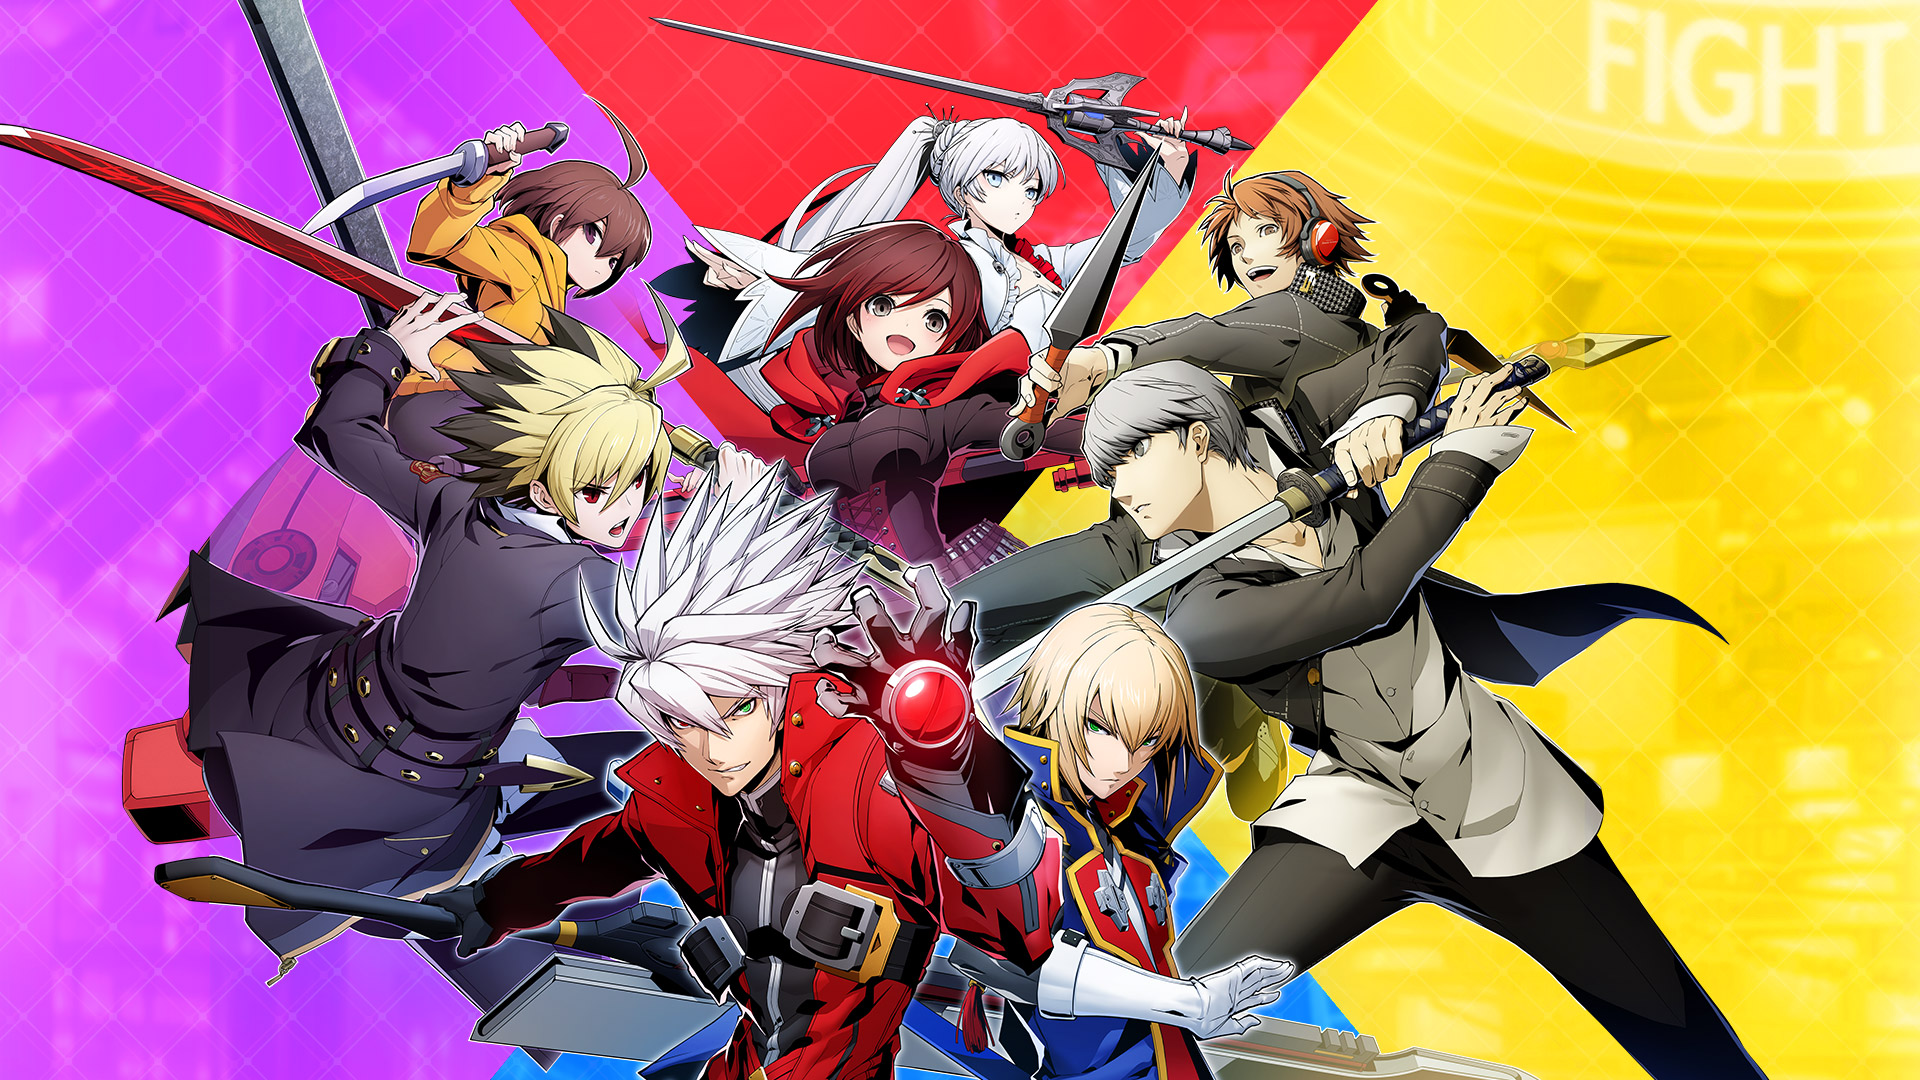 Where To Buy BlazBlue: Cross Tag Battle